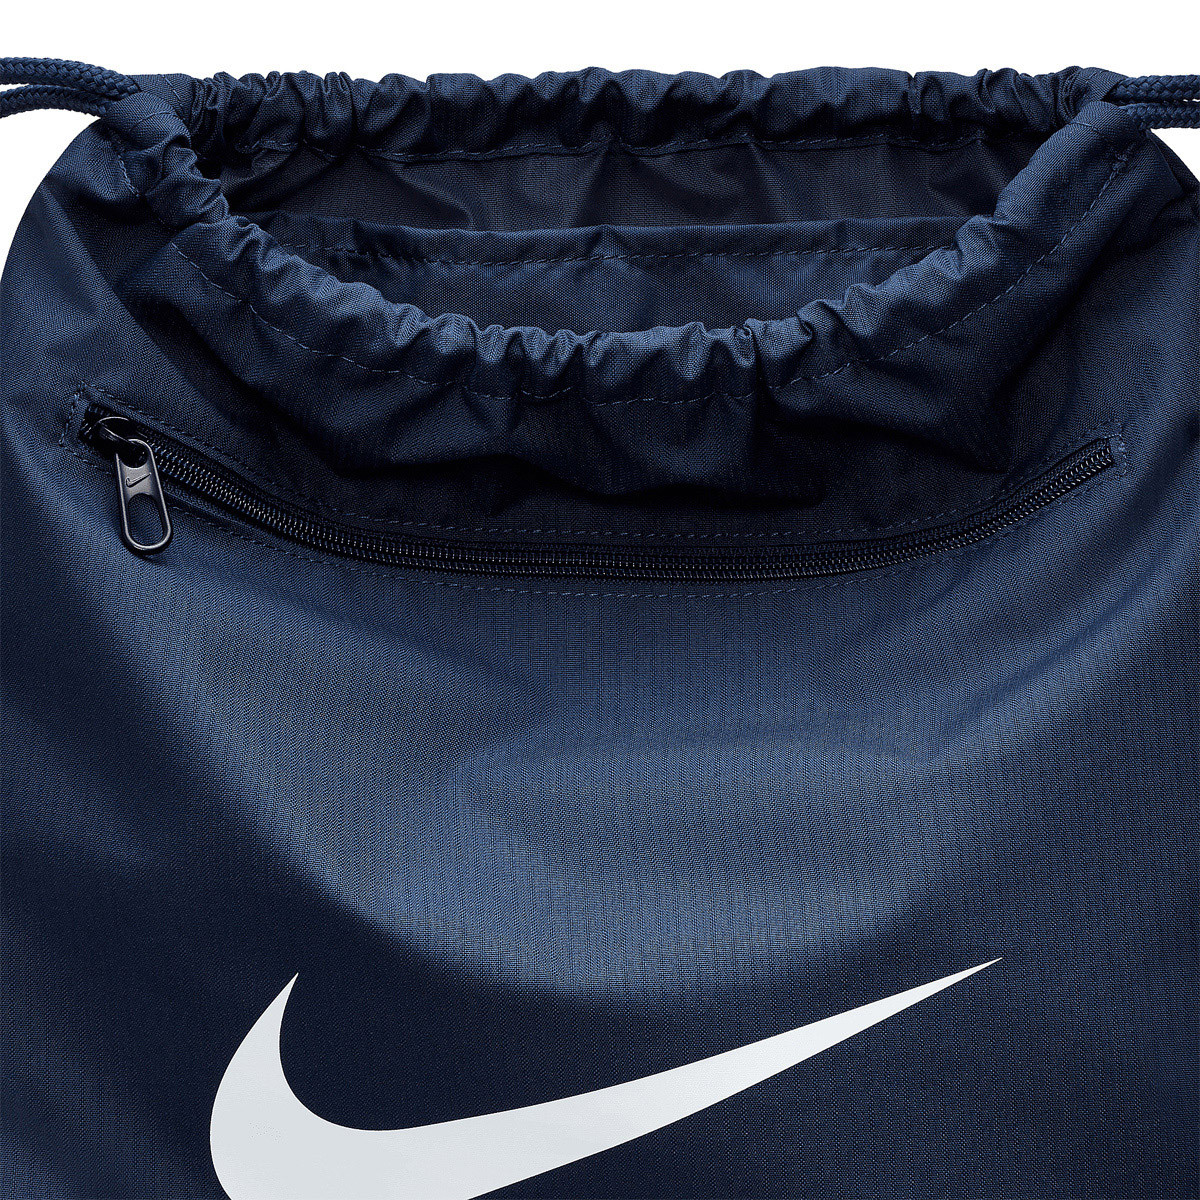 Nike Classic Fuel Insulated Lunch Bag, Bright Blue, One Size - Walmart.com